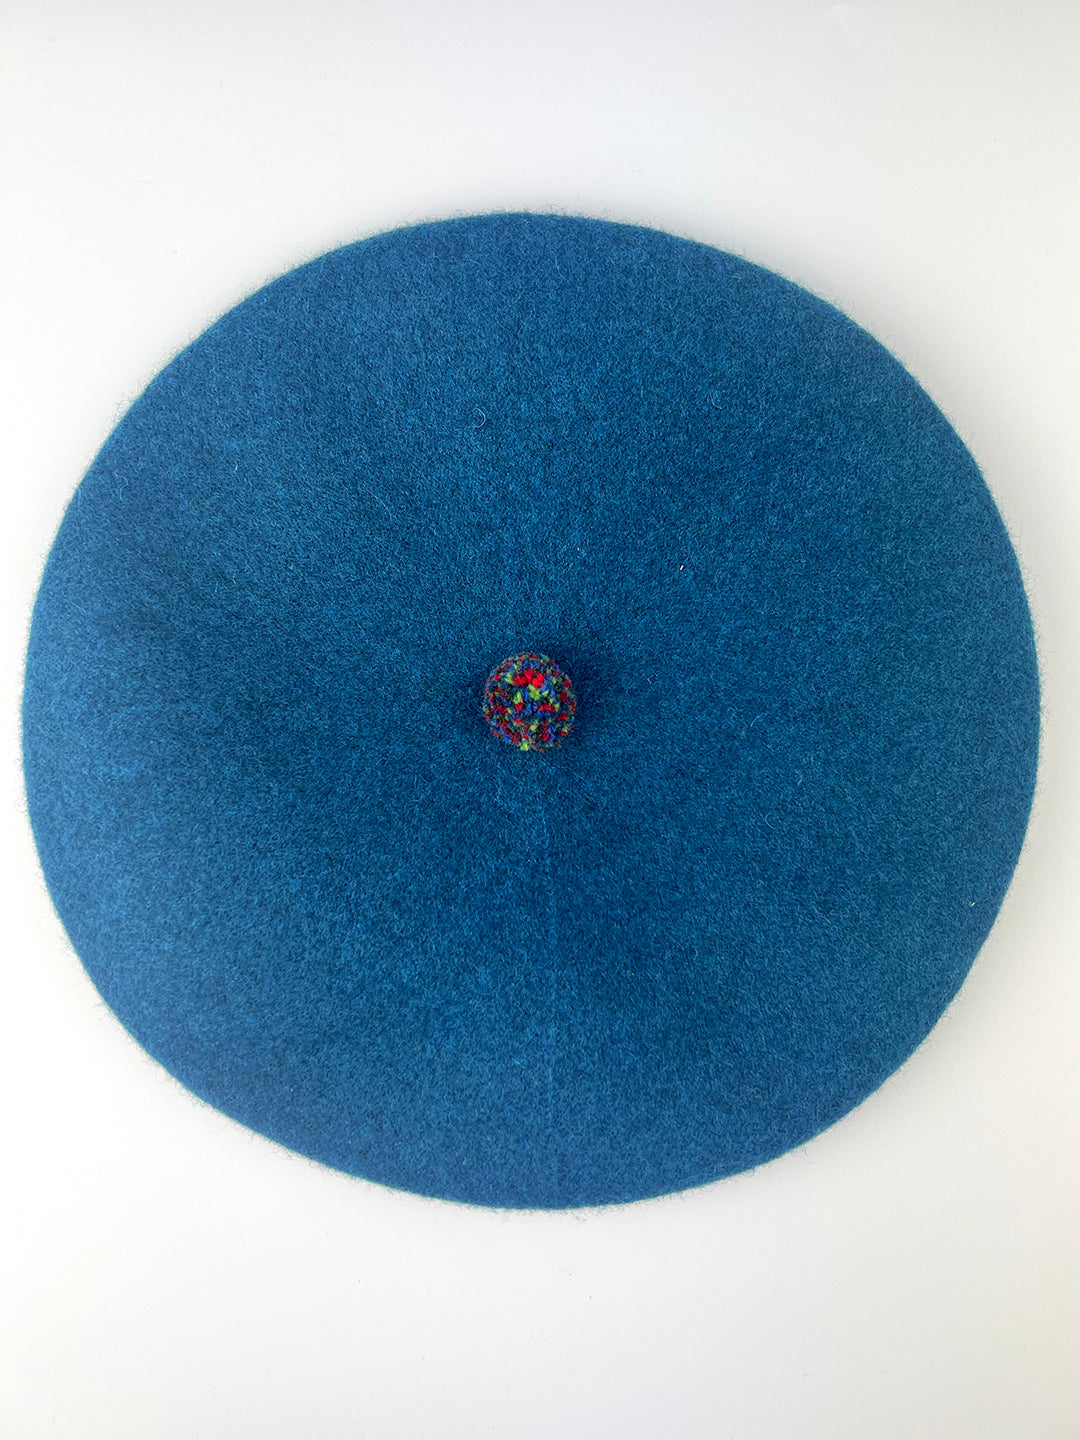 stylish bold berets with colourful pom pom detail in peacock blue, Knitted in Scotland.